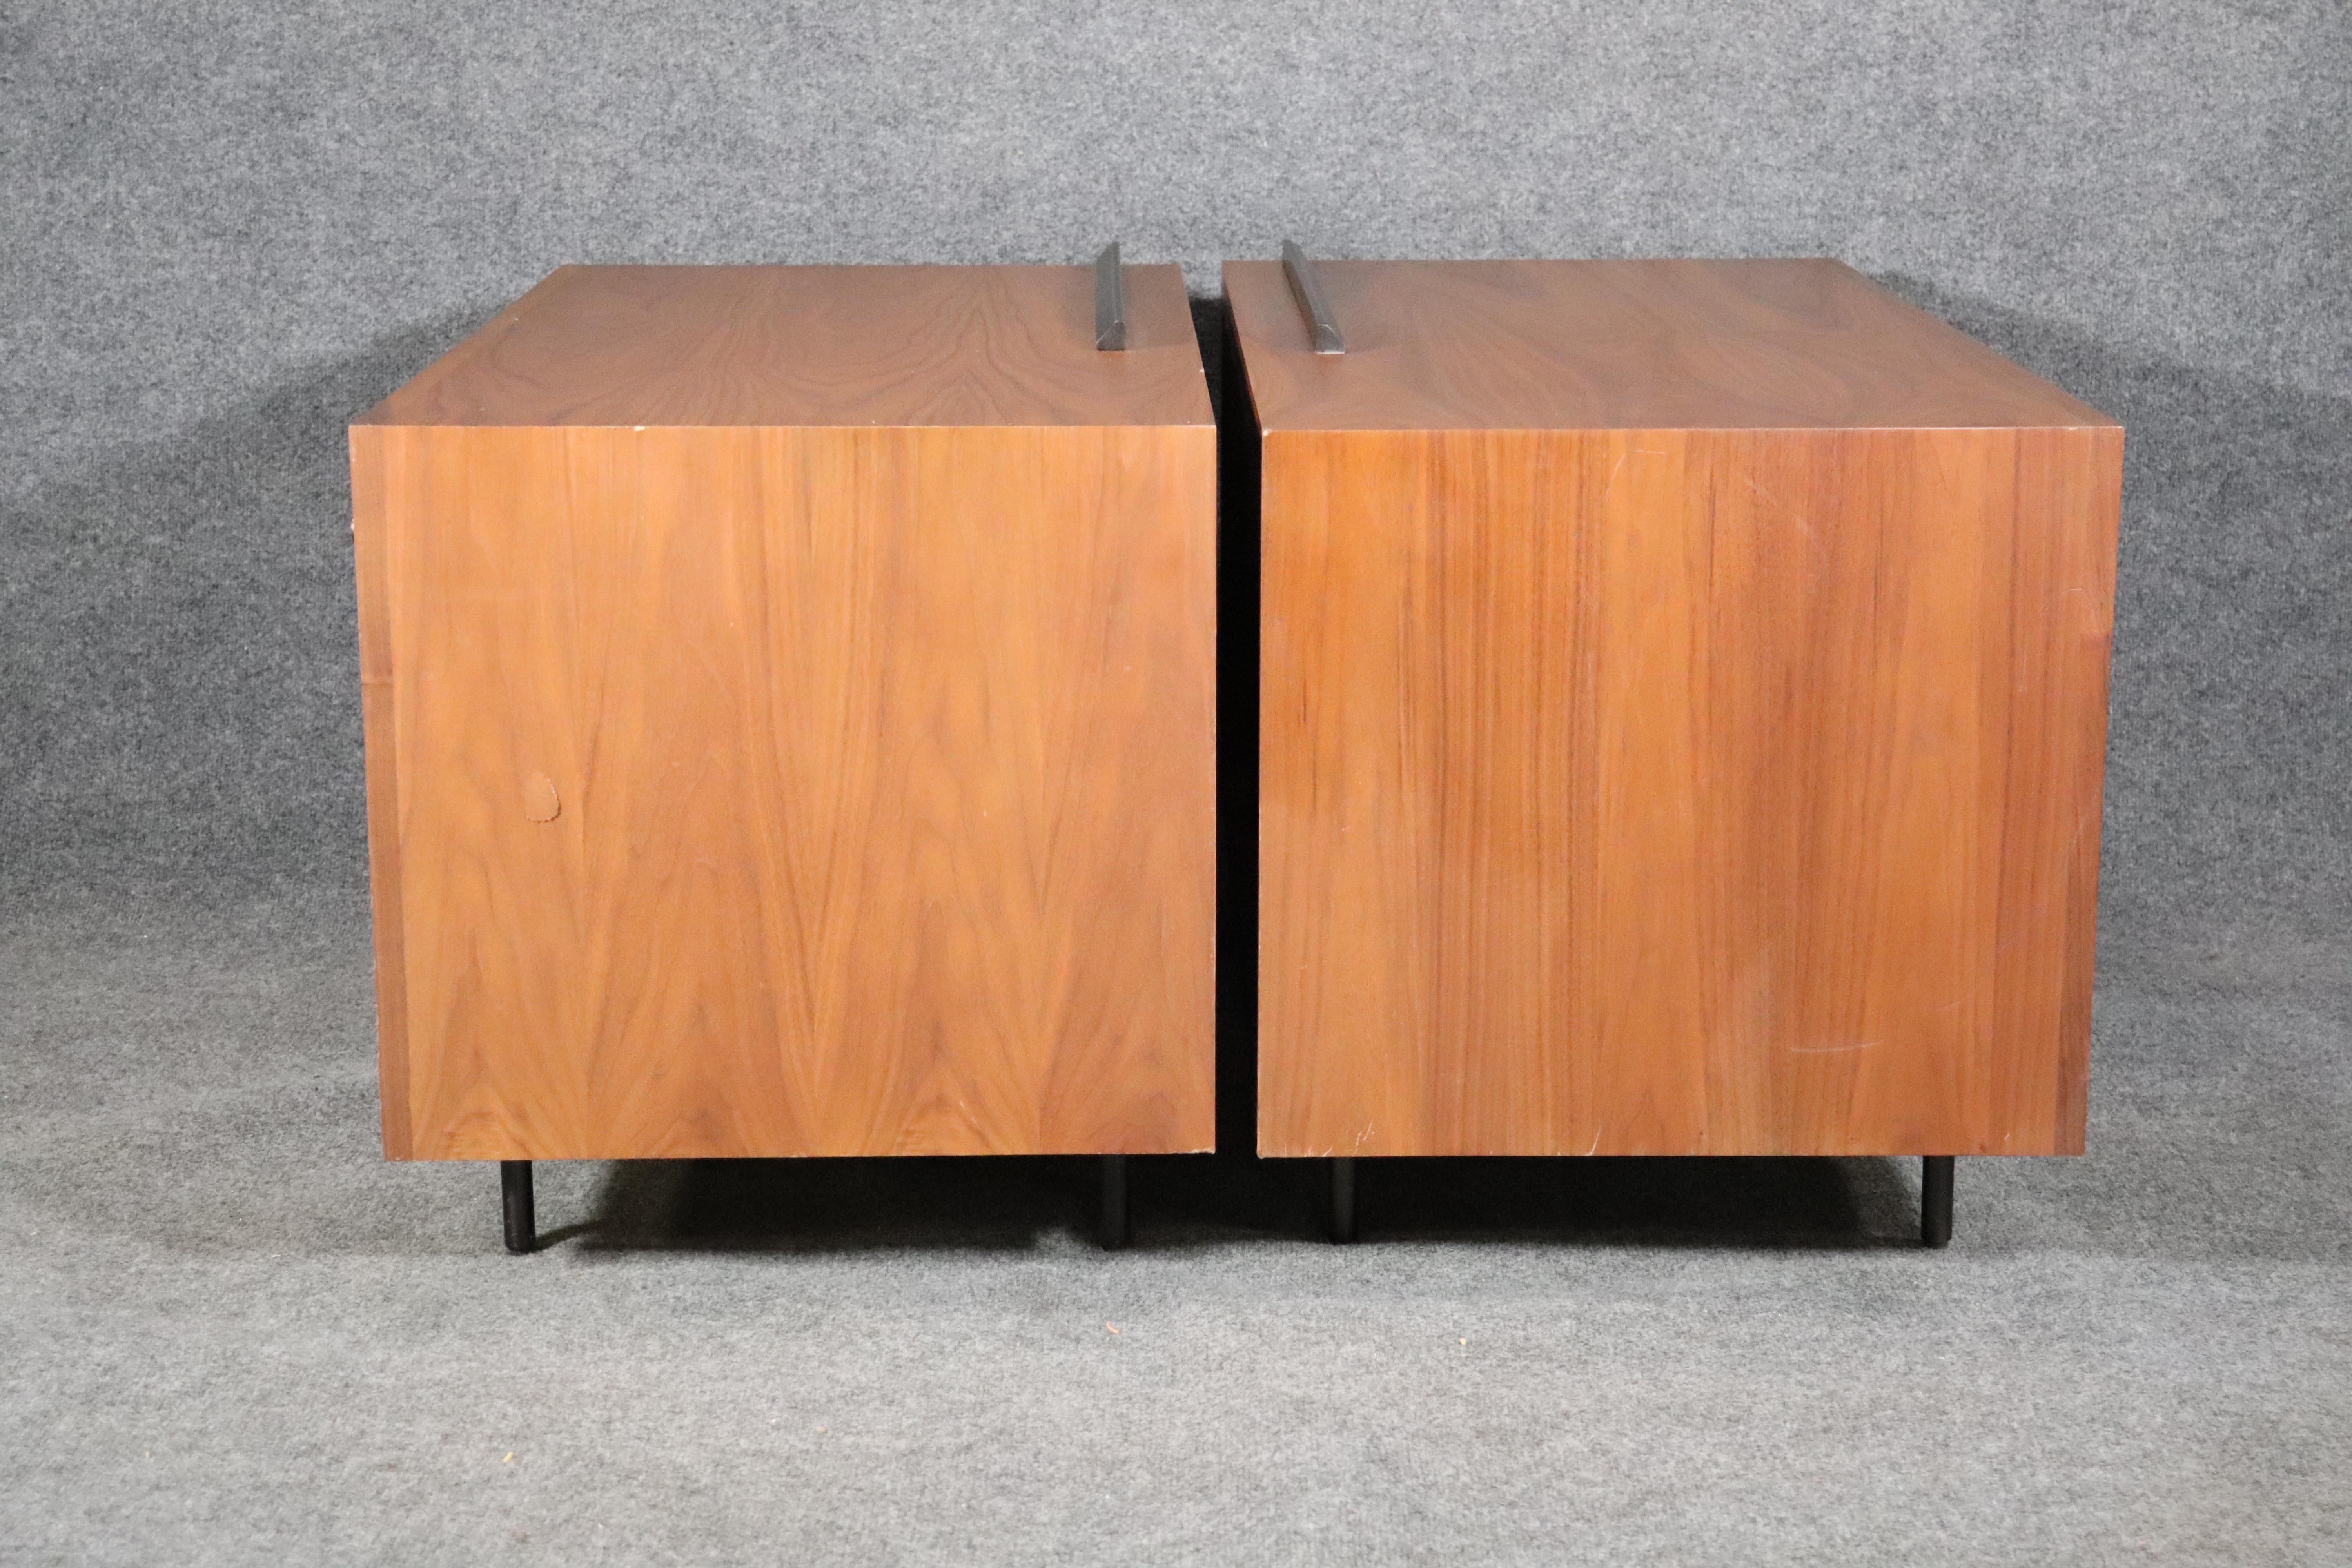 20th Century Matching Teak Cabinets For Sale